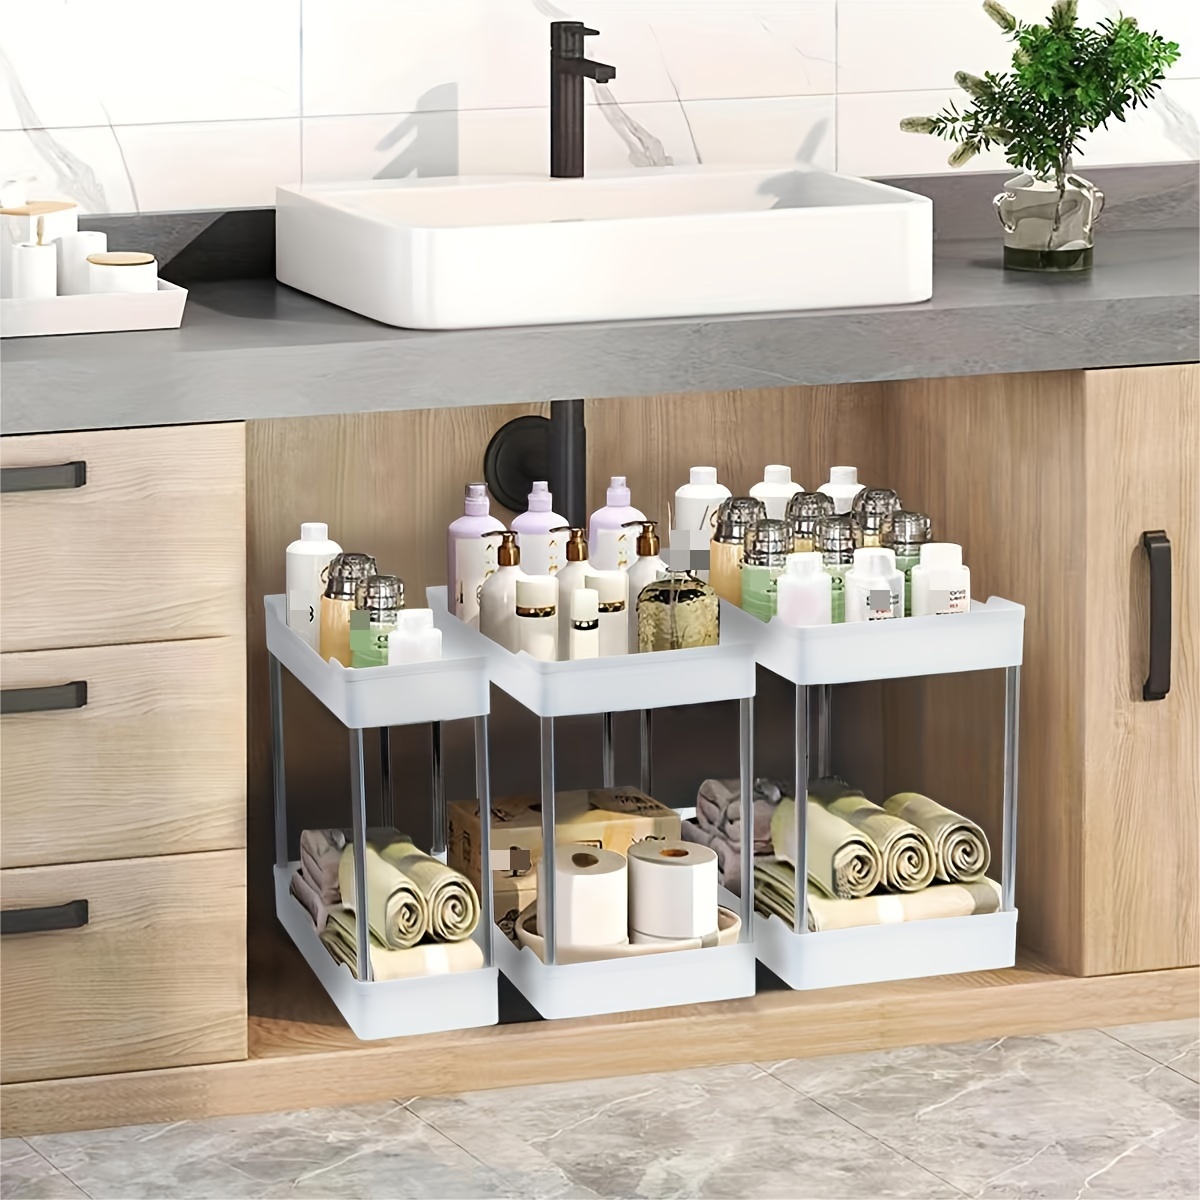 Bathroom Under Sink Cabinet Organizer. Perfect for QTips, Rounds